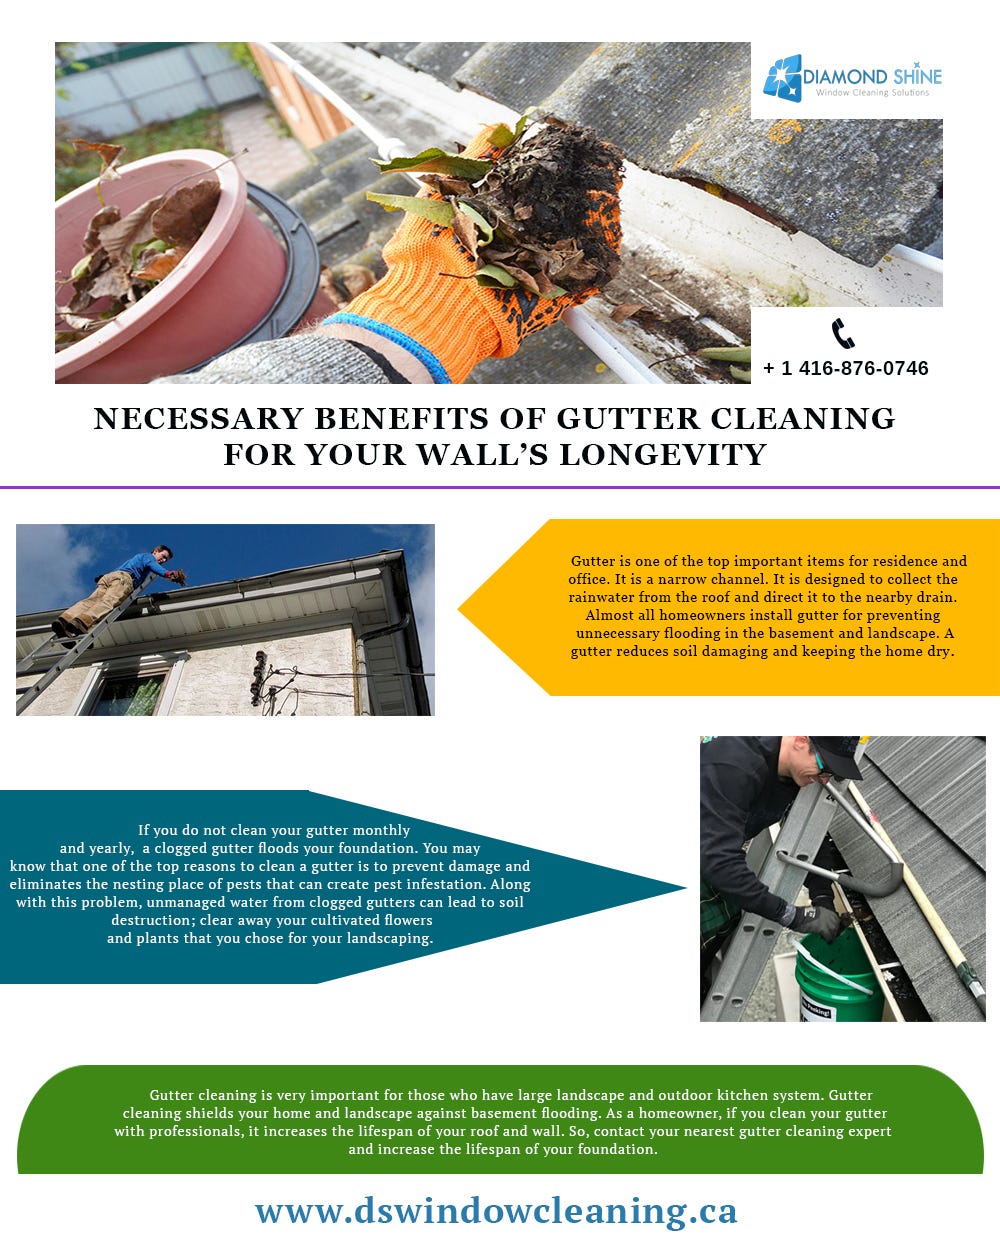 Gutter Cleaning Services In Sutton Ma